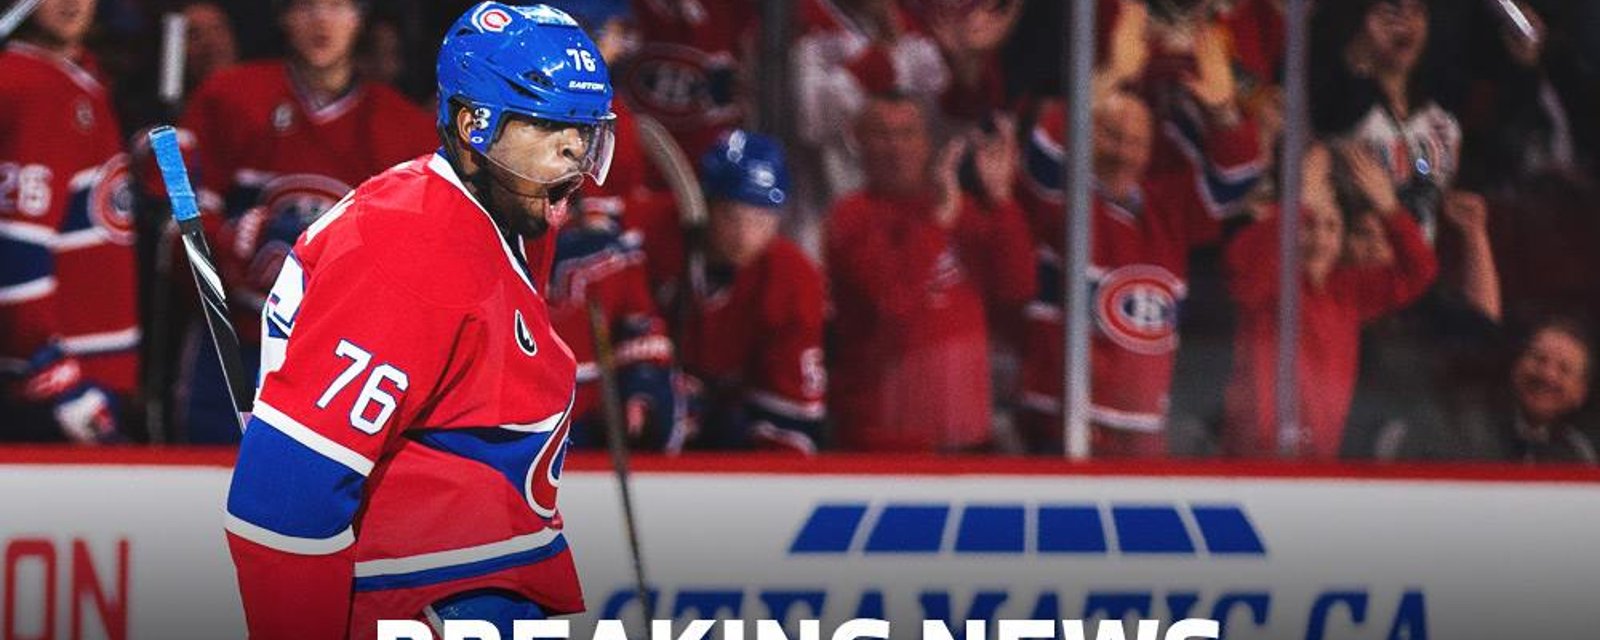 Breaking: Controversy surrounding Subban's return to Montreal tonight has already started.